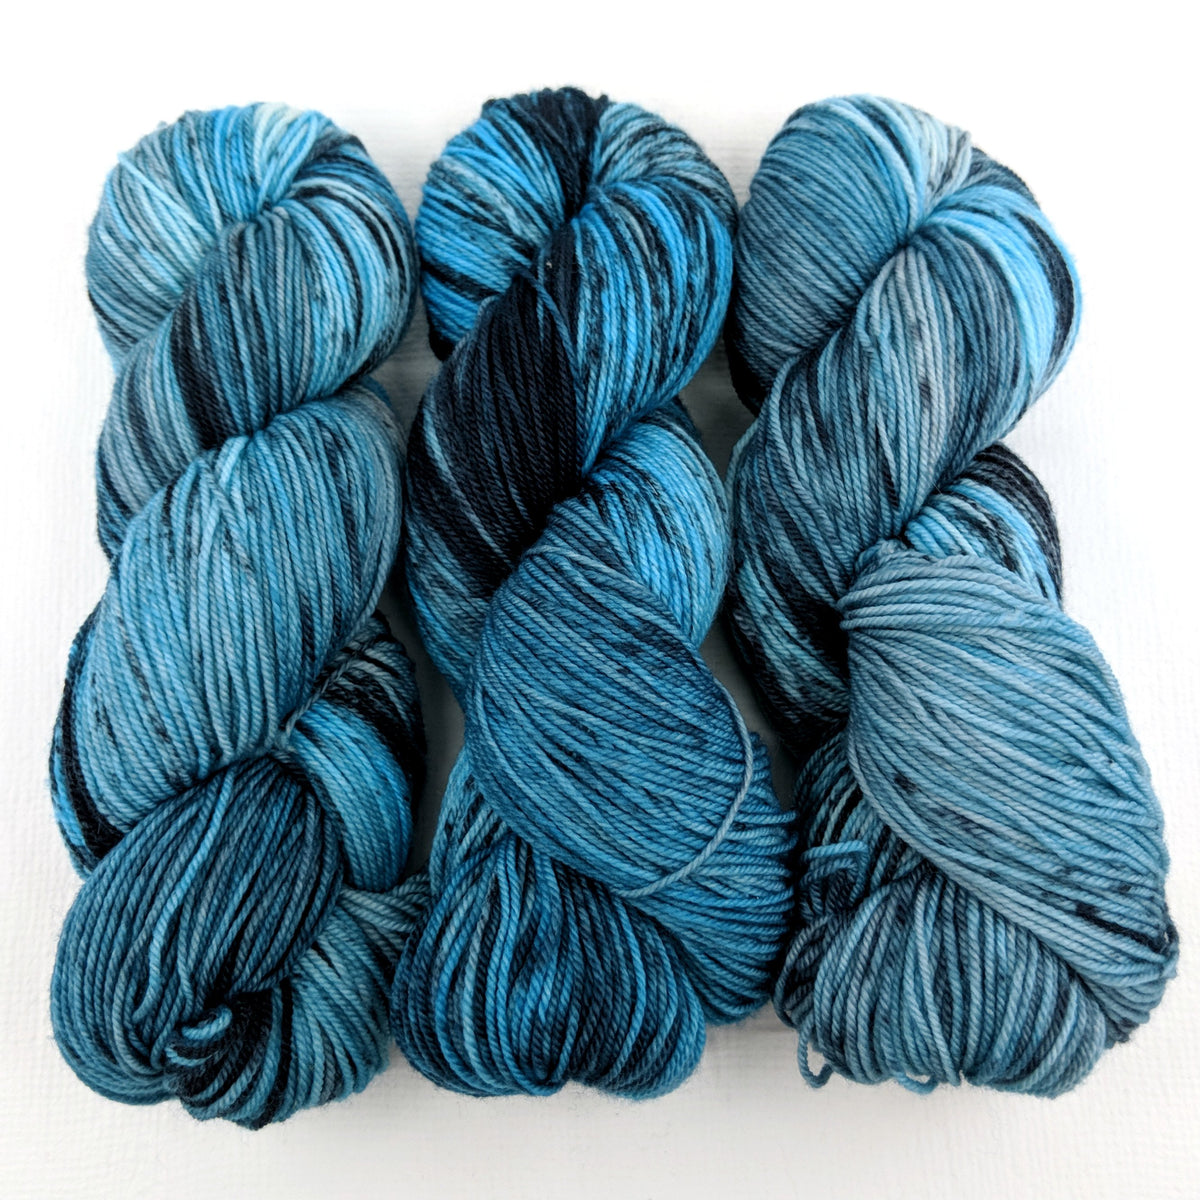 Chinook Arch - Merino DK / Light Worsted - Dyed Stock